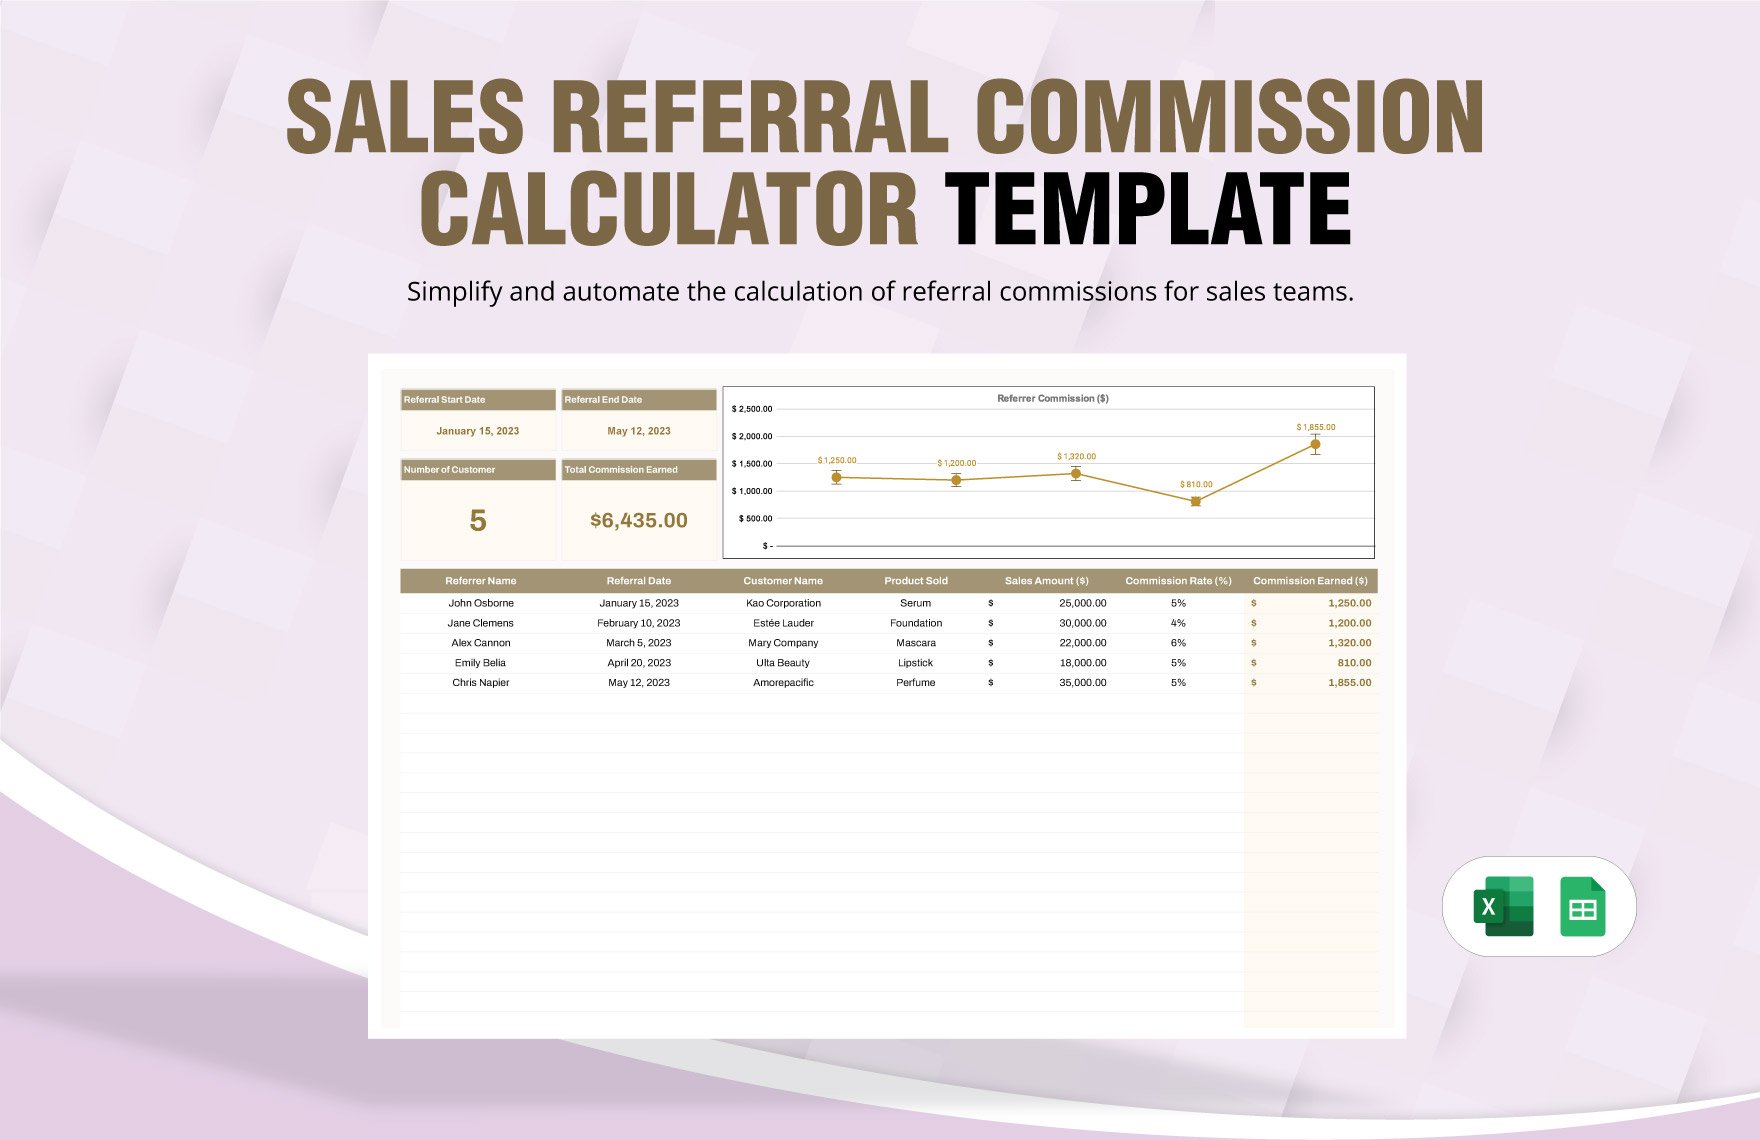 Sales Referral Commission Calculator Template in Excel, Google Sheets